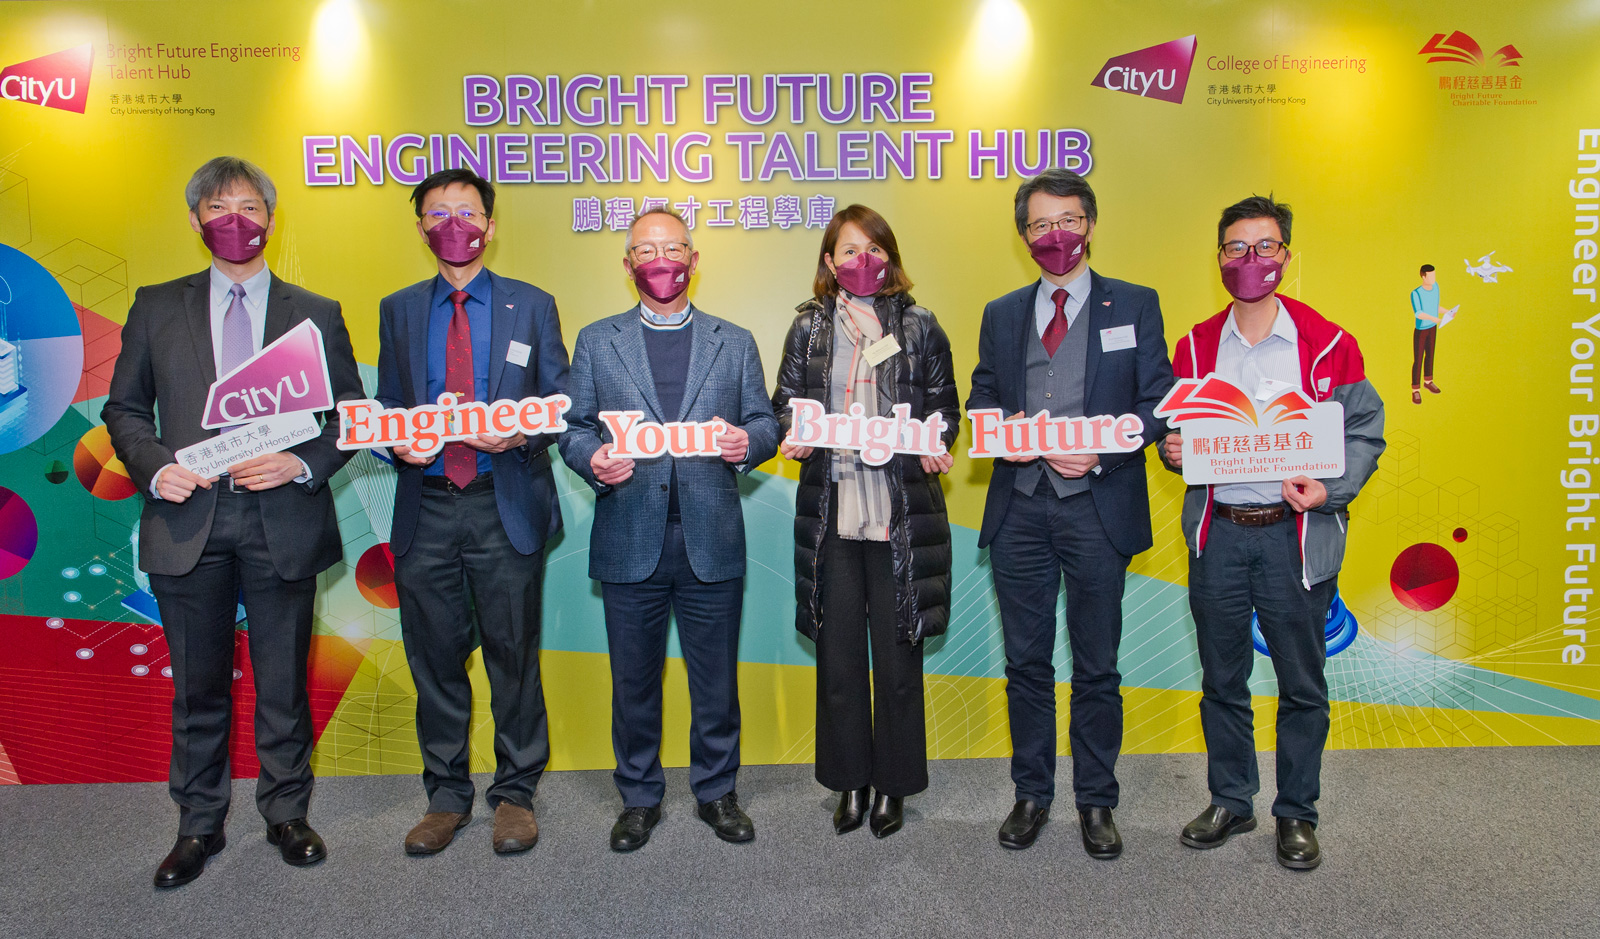 The Bright Future Engineering Talent Hub has been established at the College of Engineering at CityU thanks to a generous donation of HK$4 million from the Bright Future Charitable Foundation.